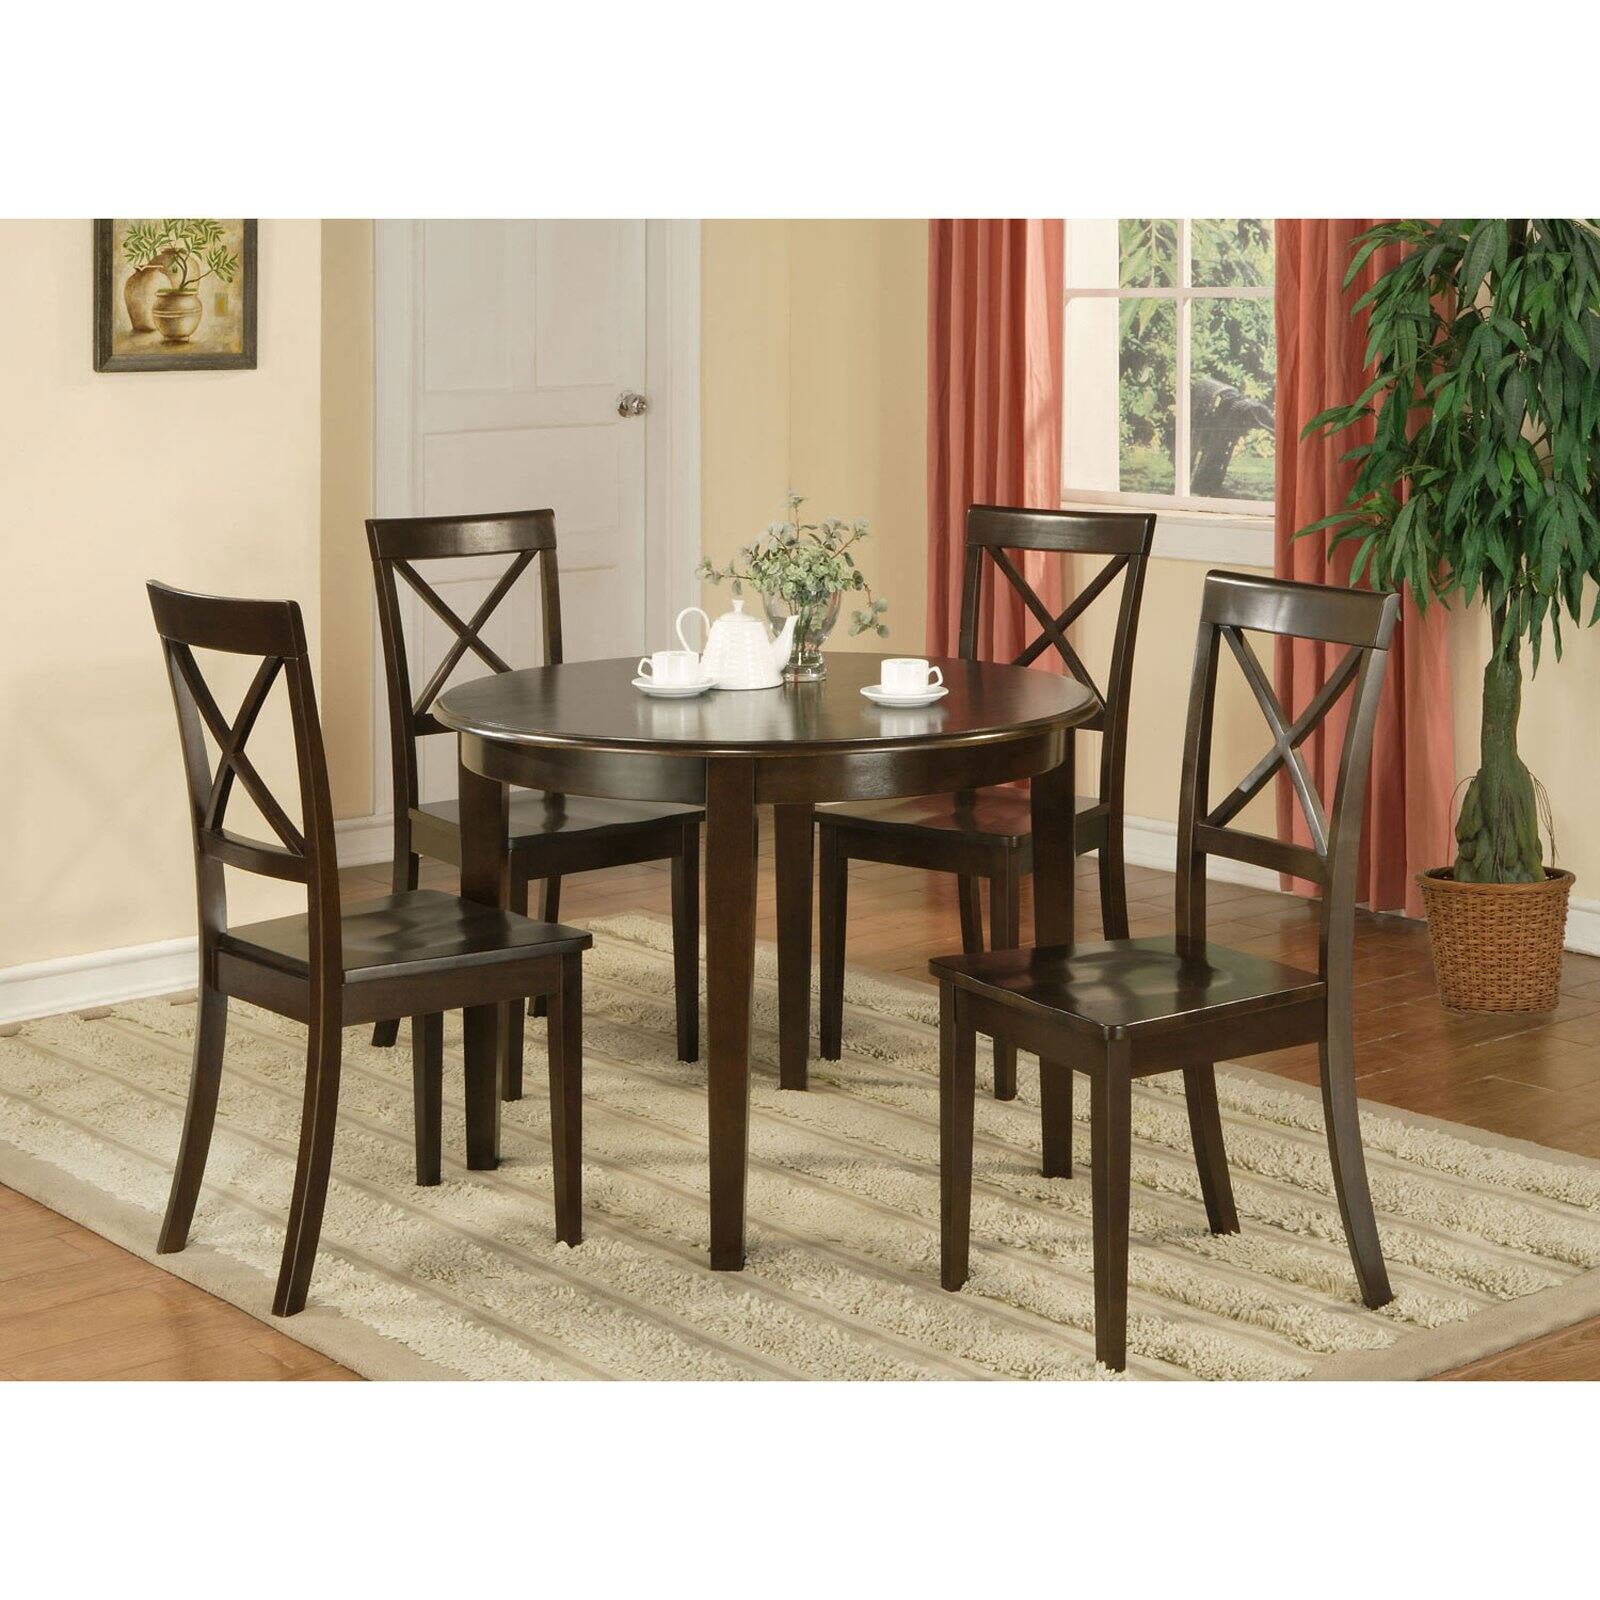 Bost3 Cap W 3 Pc Small Kitchen Table, Circle Dining Table And Chairs Set